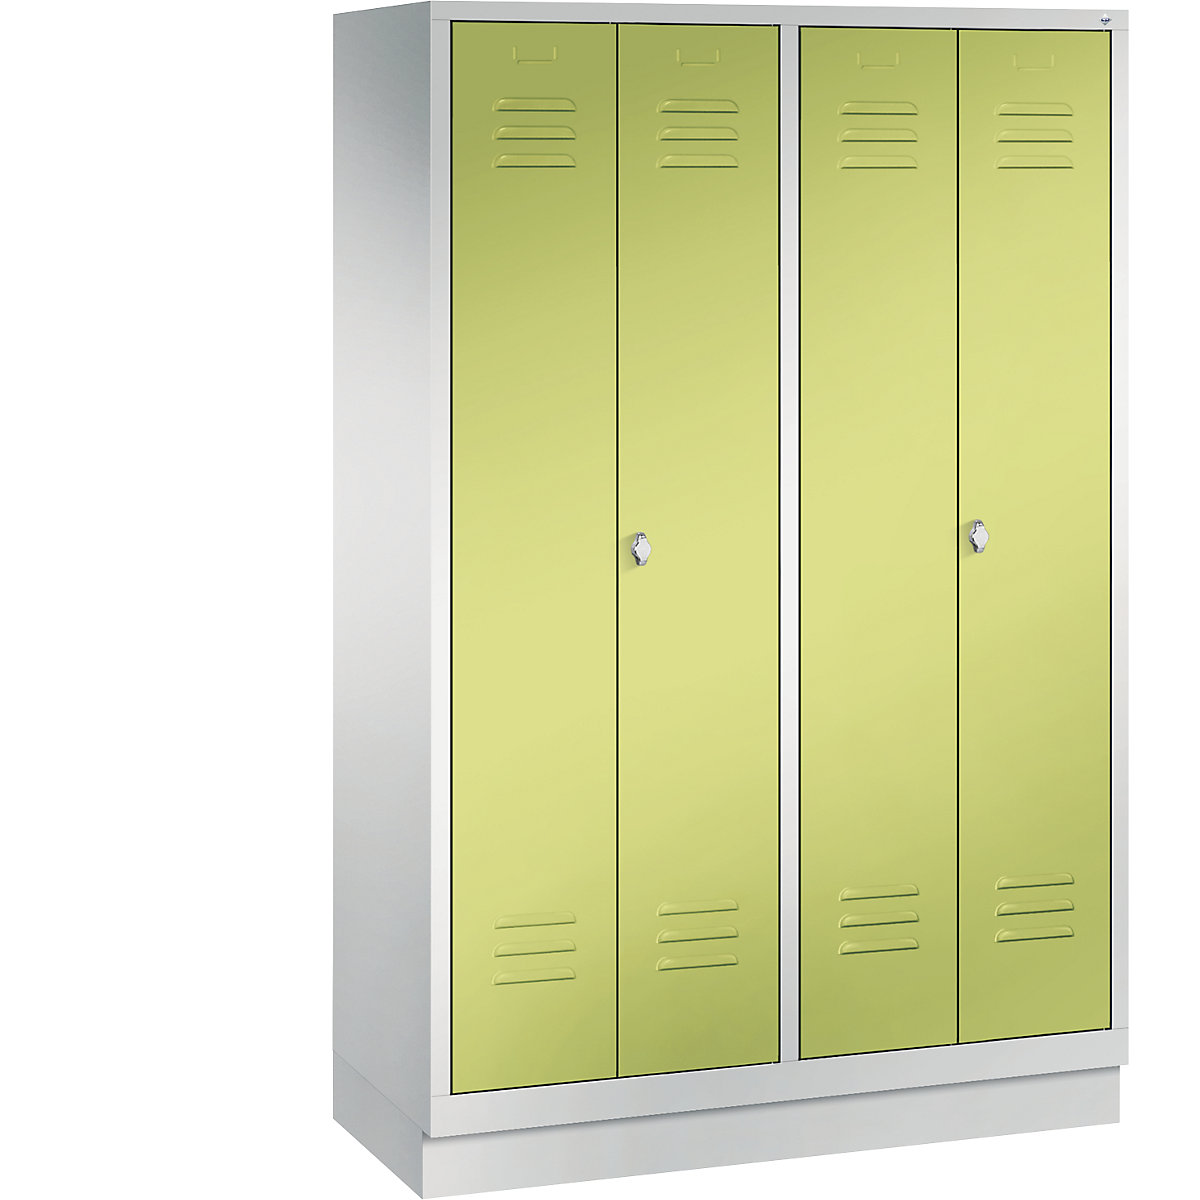 CLASSIC cloakroom locker with plinth, doors close in the middle – C+P